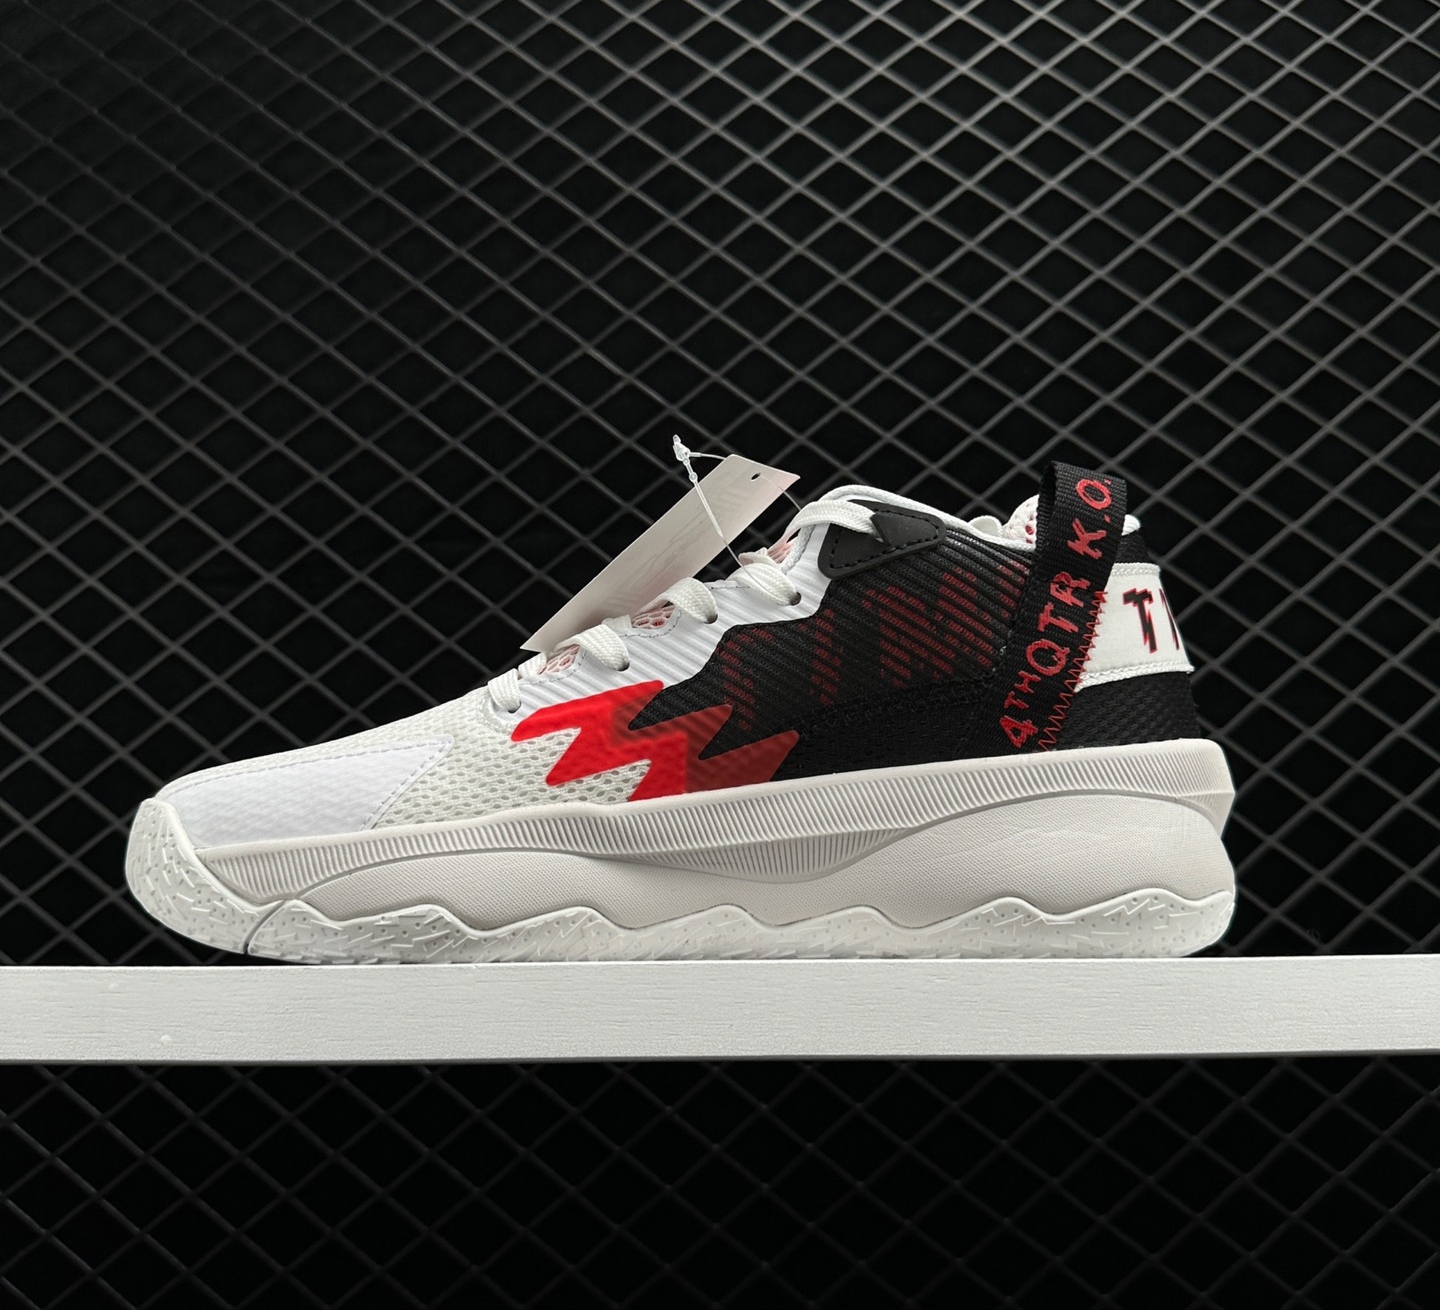 Adidas Dame 8 'Dame Time' White Black Red GY0384 - Sleek Design for Unstoppable Performance